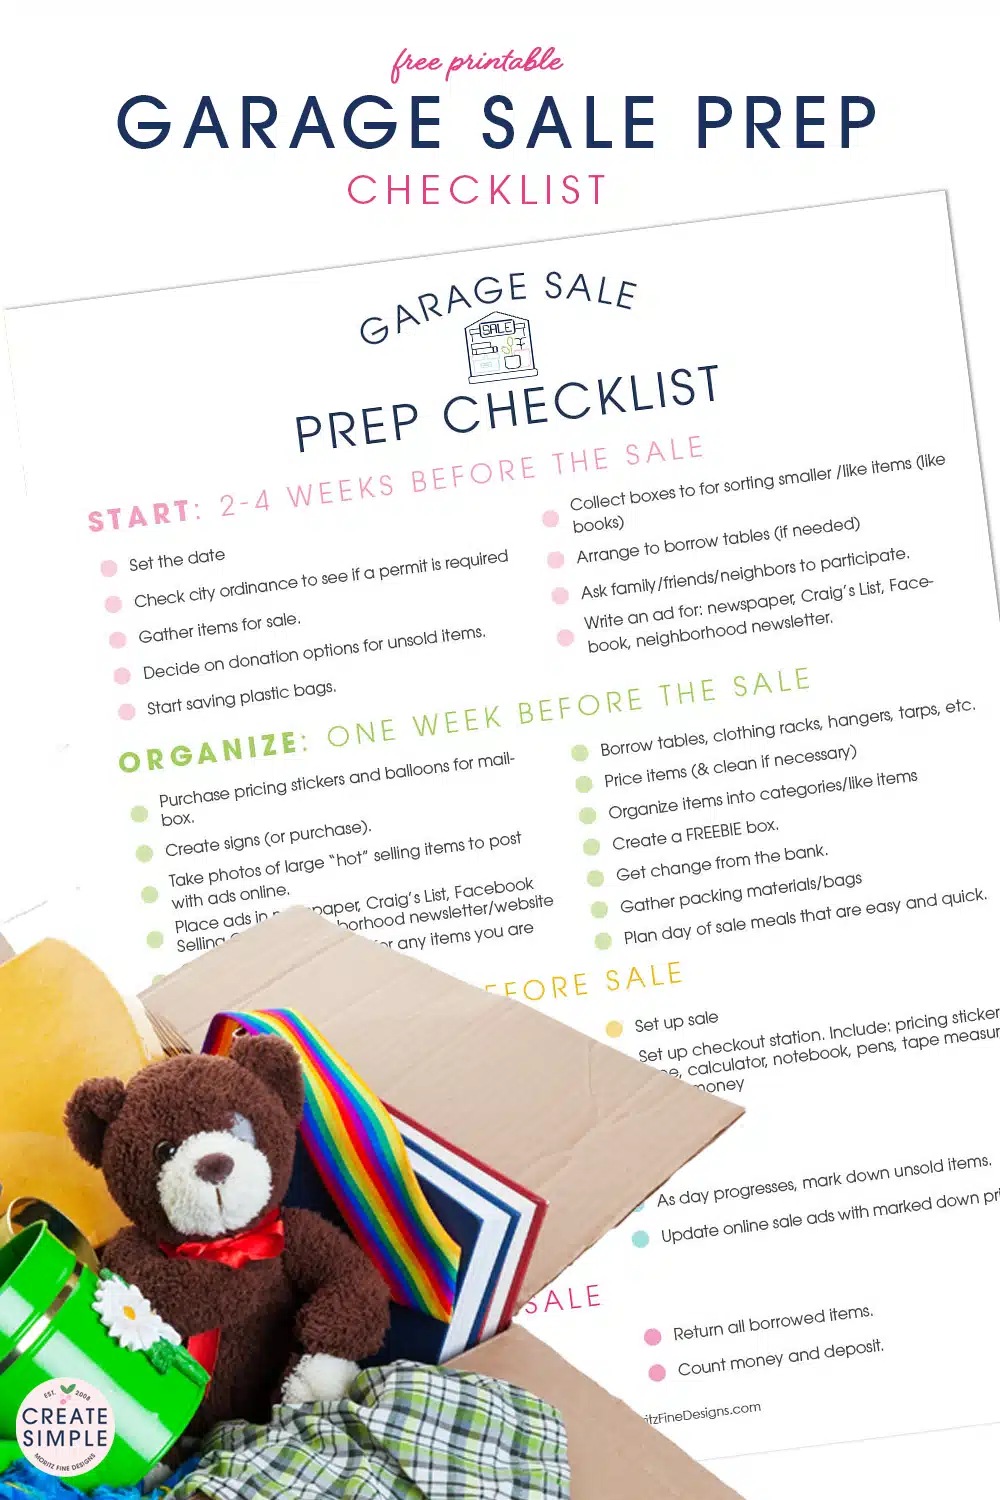 If you’re thinking about hosting a garage sale, using a free printable Garage Sale Prep Checklist will help you put on the most successful garage sale ever.